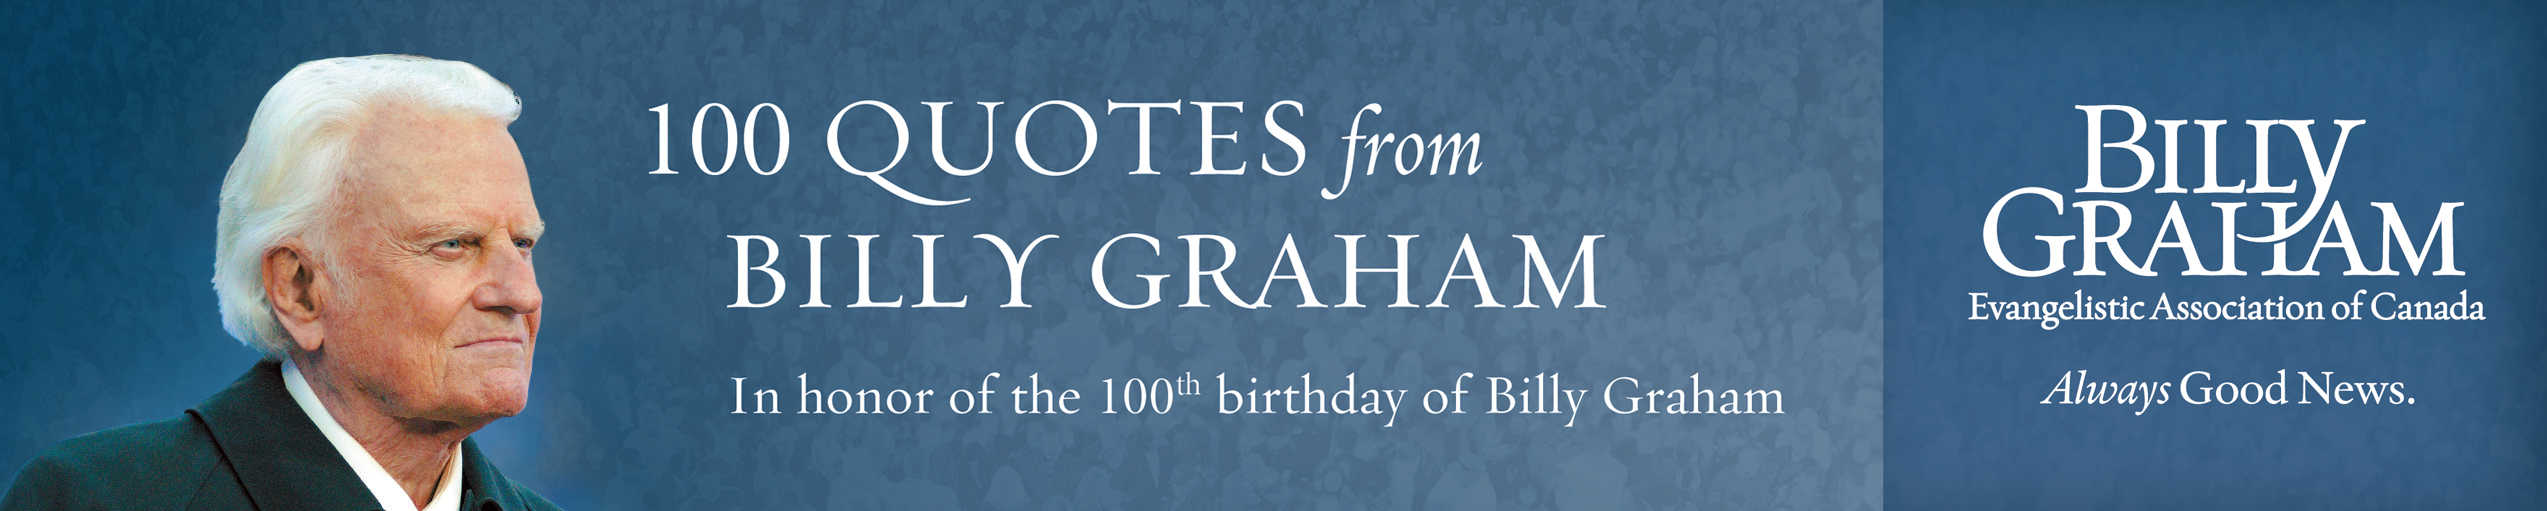 100 Quotes From Billy Graham The Billy Graham Evangelistic Association Of Canada